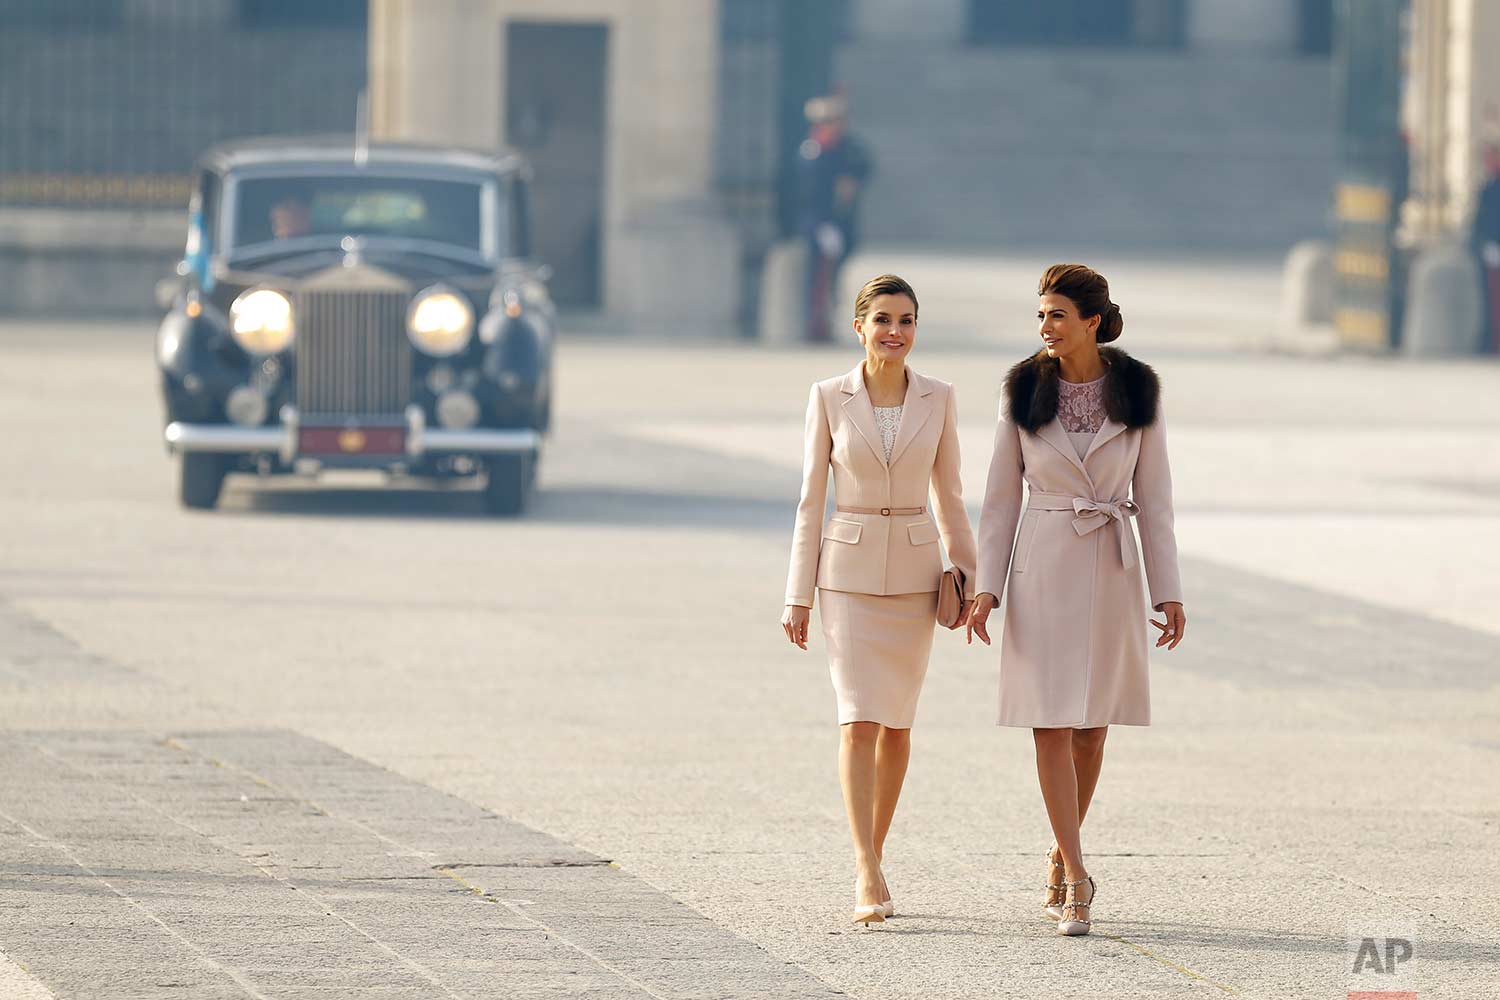  In this Wednesday, Feb. 22, 2017 photo, Spain's Queen Letizia, left, talks to Juliana Awada, the wife of the Argentina's President Mauricio Macri, during a welcome ceremony at the Royal Palace in Madrid. Macri and his wife Awada are on the first of 